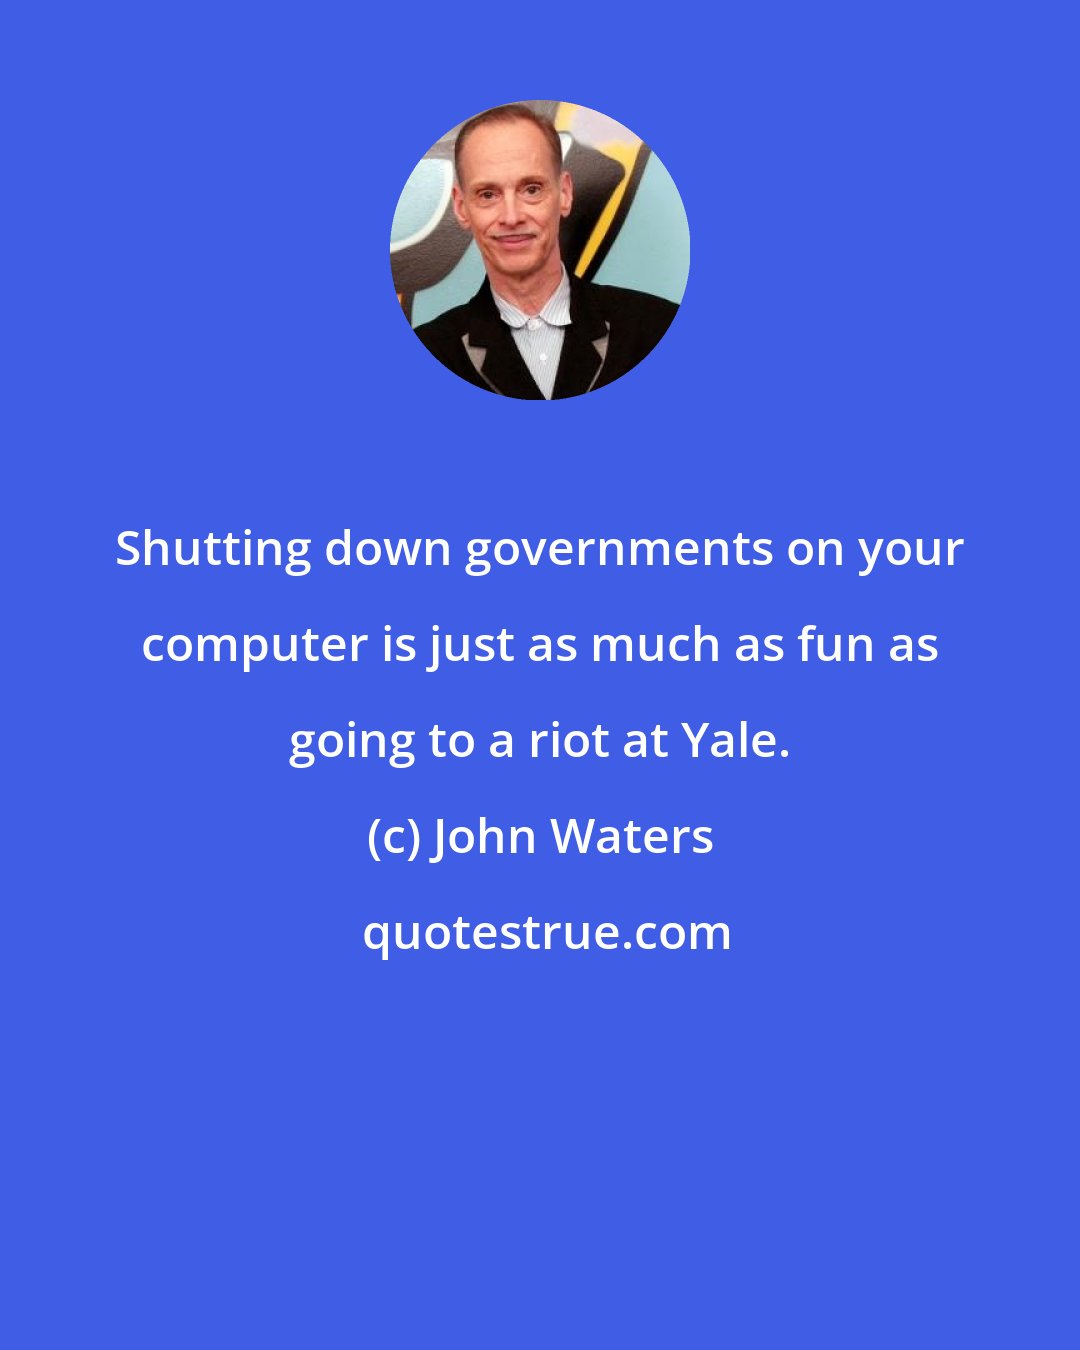 John Waters: Shutting down governments on your computer is just as much as fun as going to a riot at Yale.